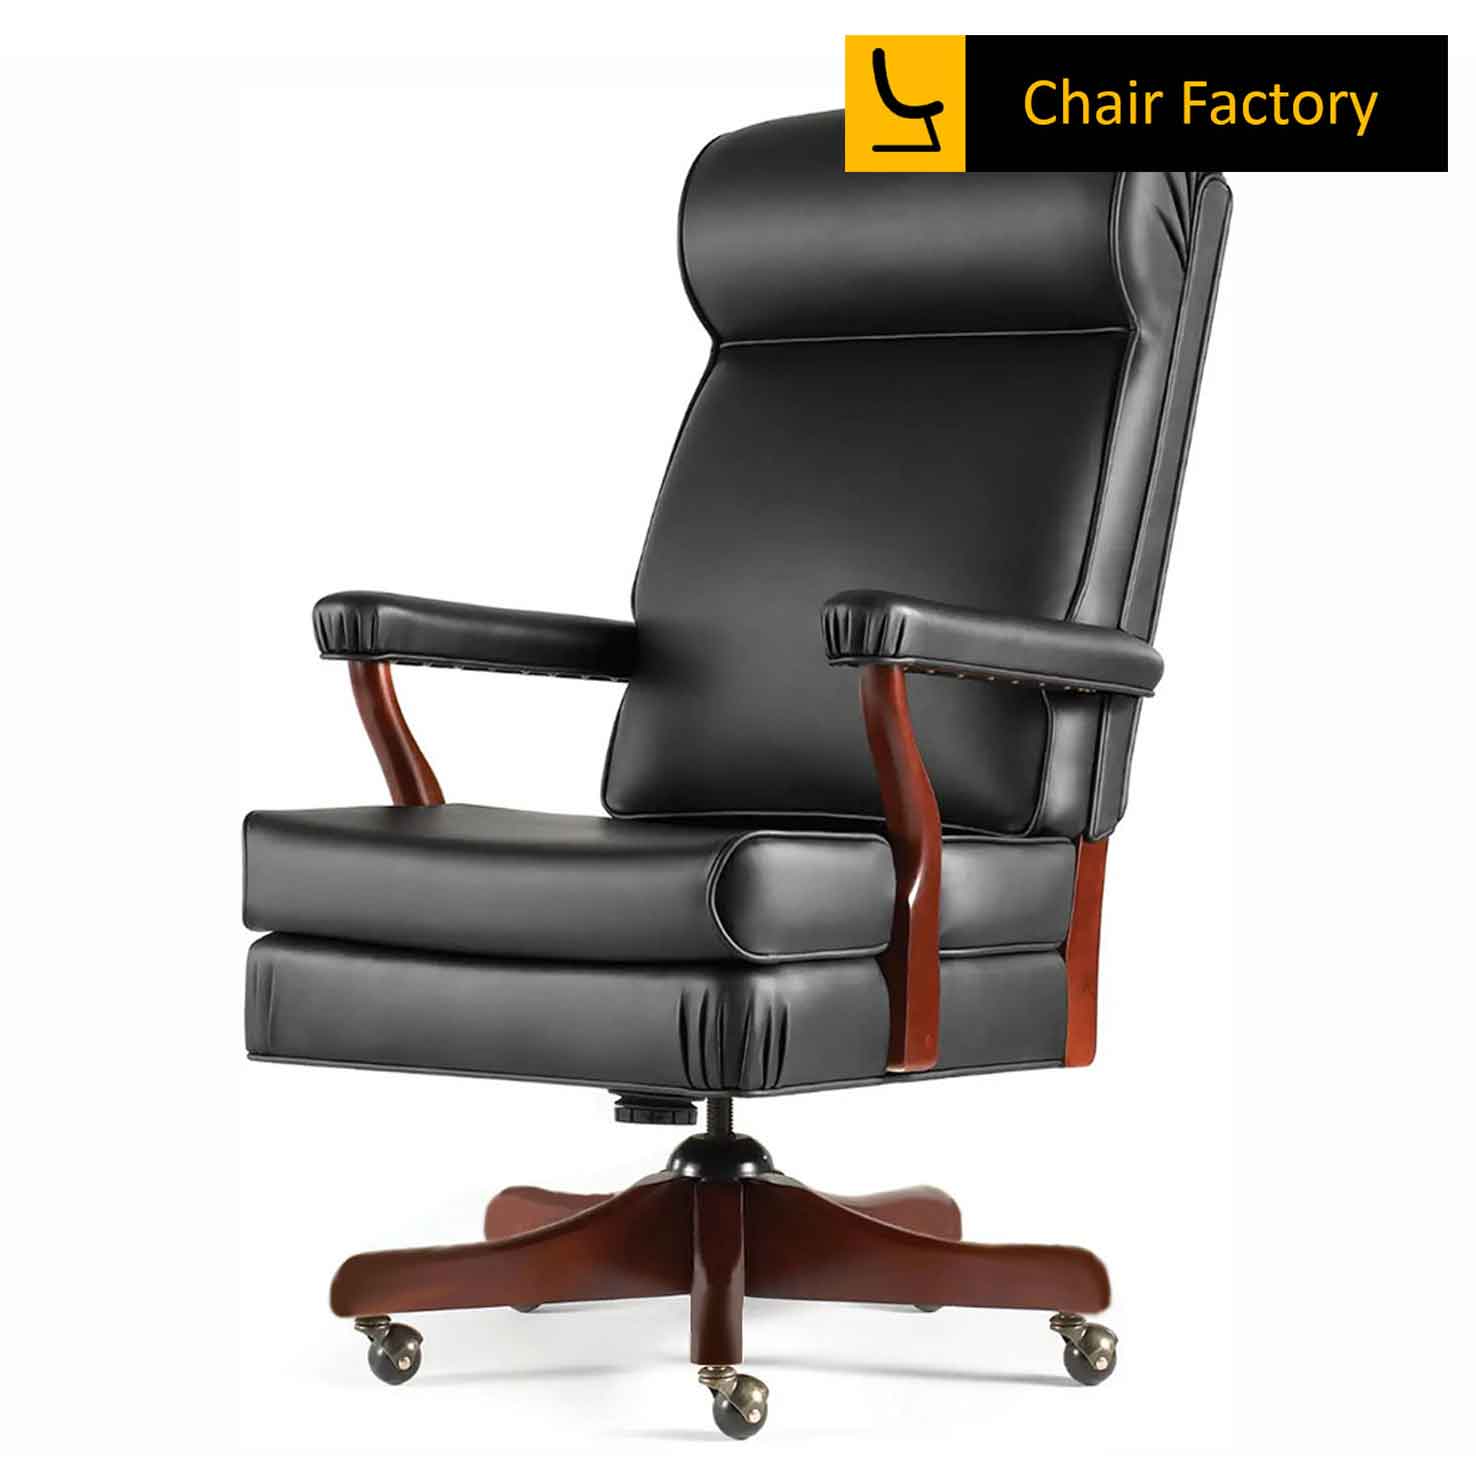 Benchmark High Back 100% genuine leather chair 